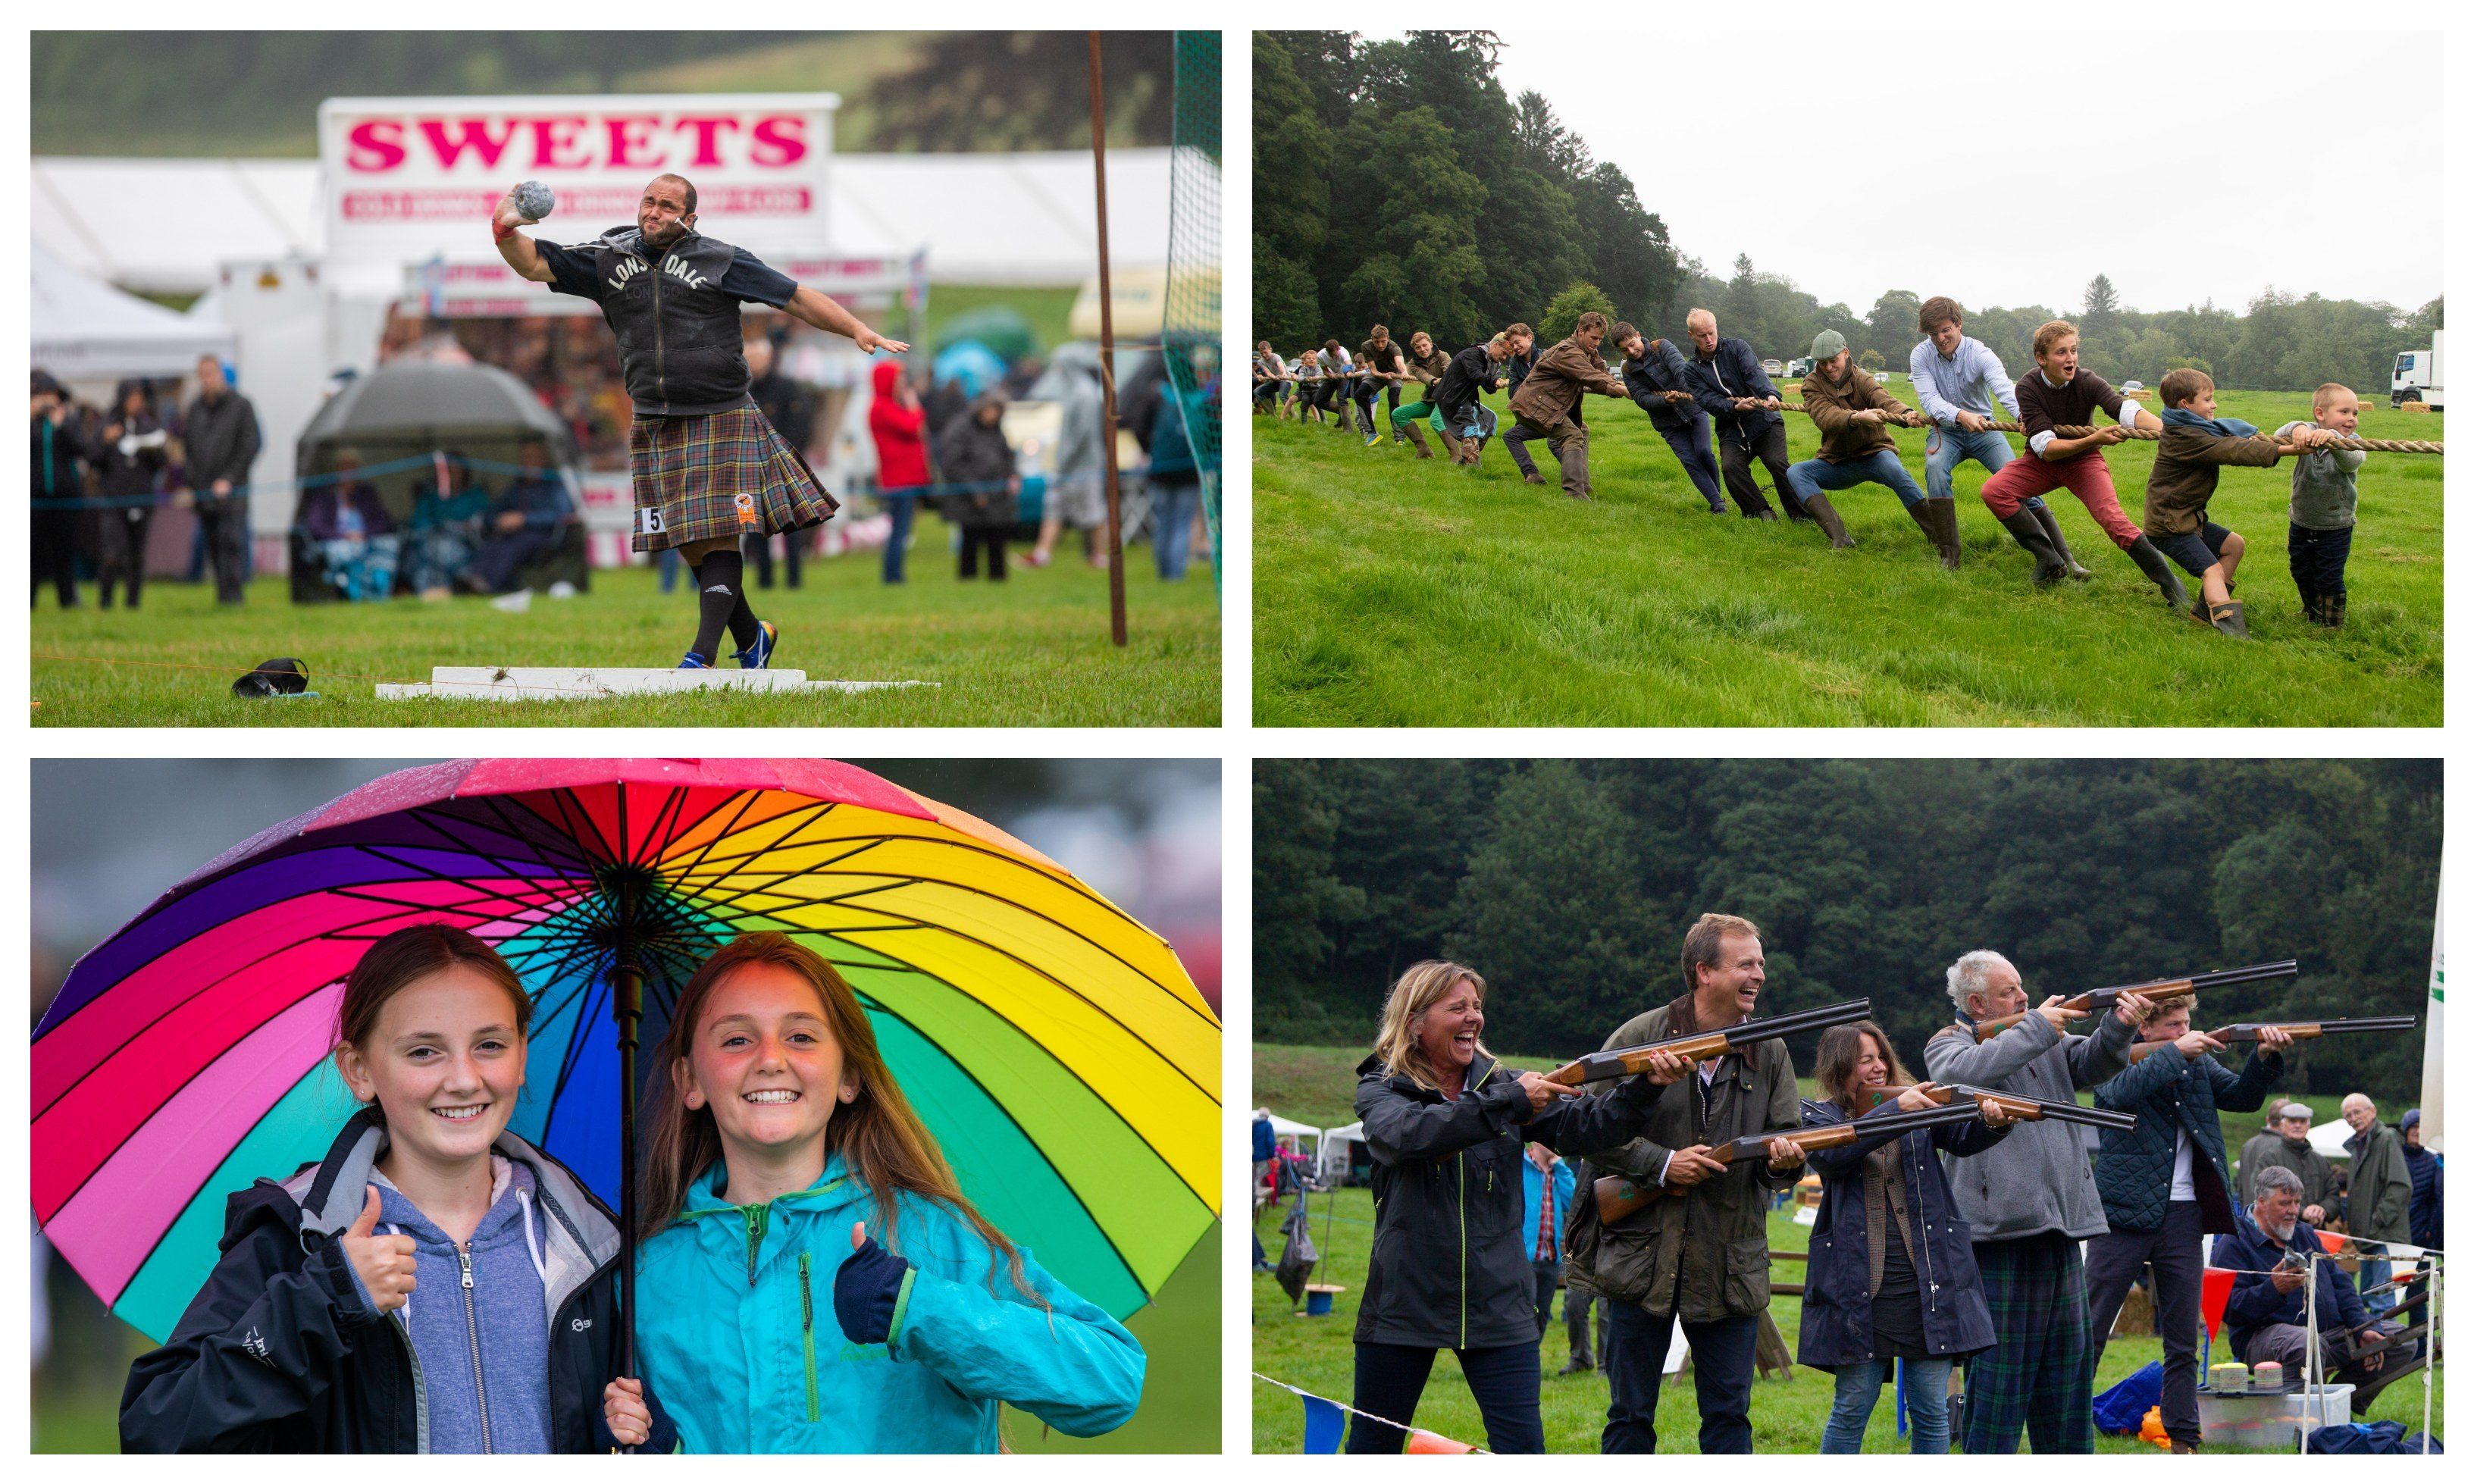 Pictures from Perth Highland Games and Cortachy Highland Games.